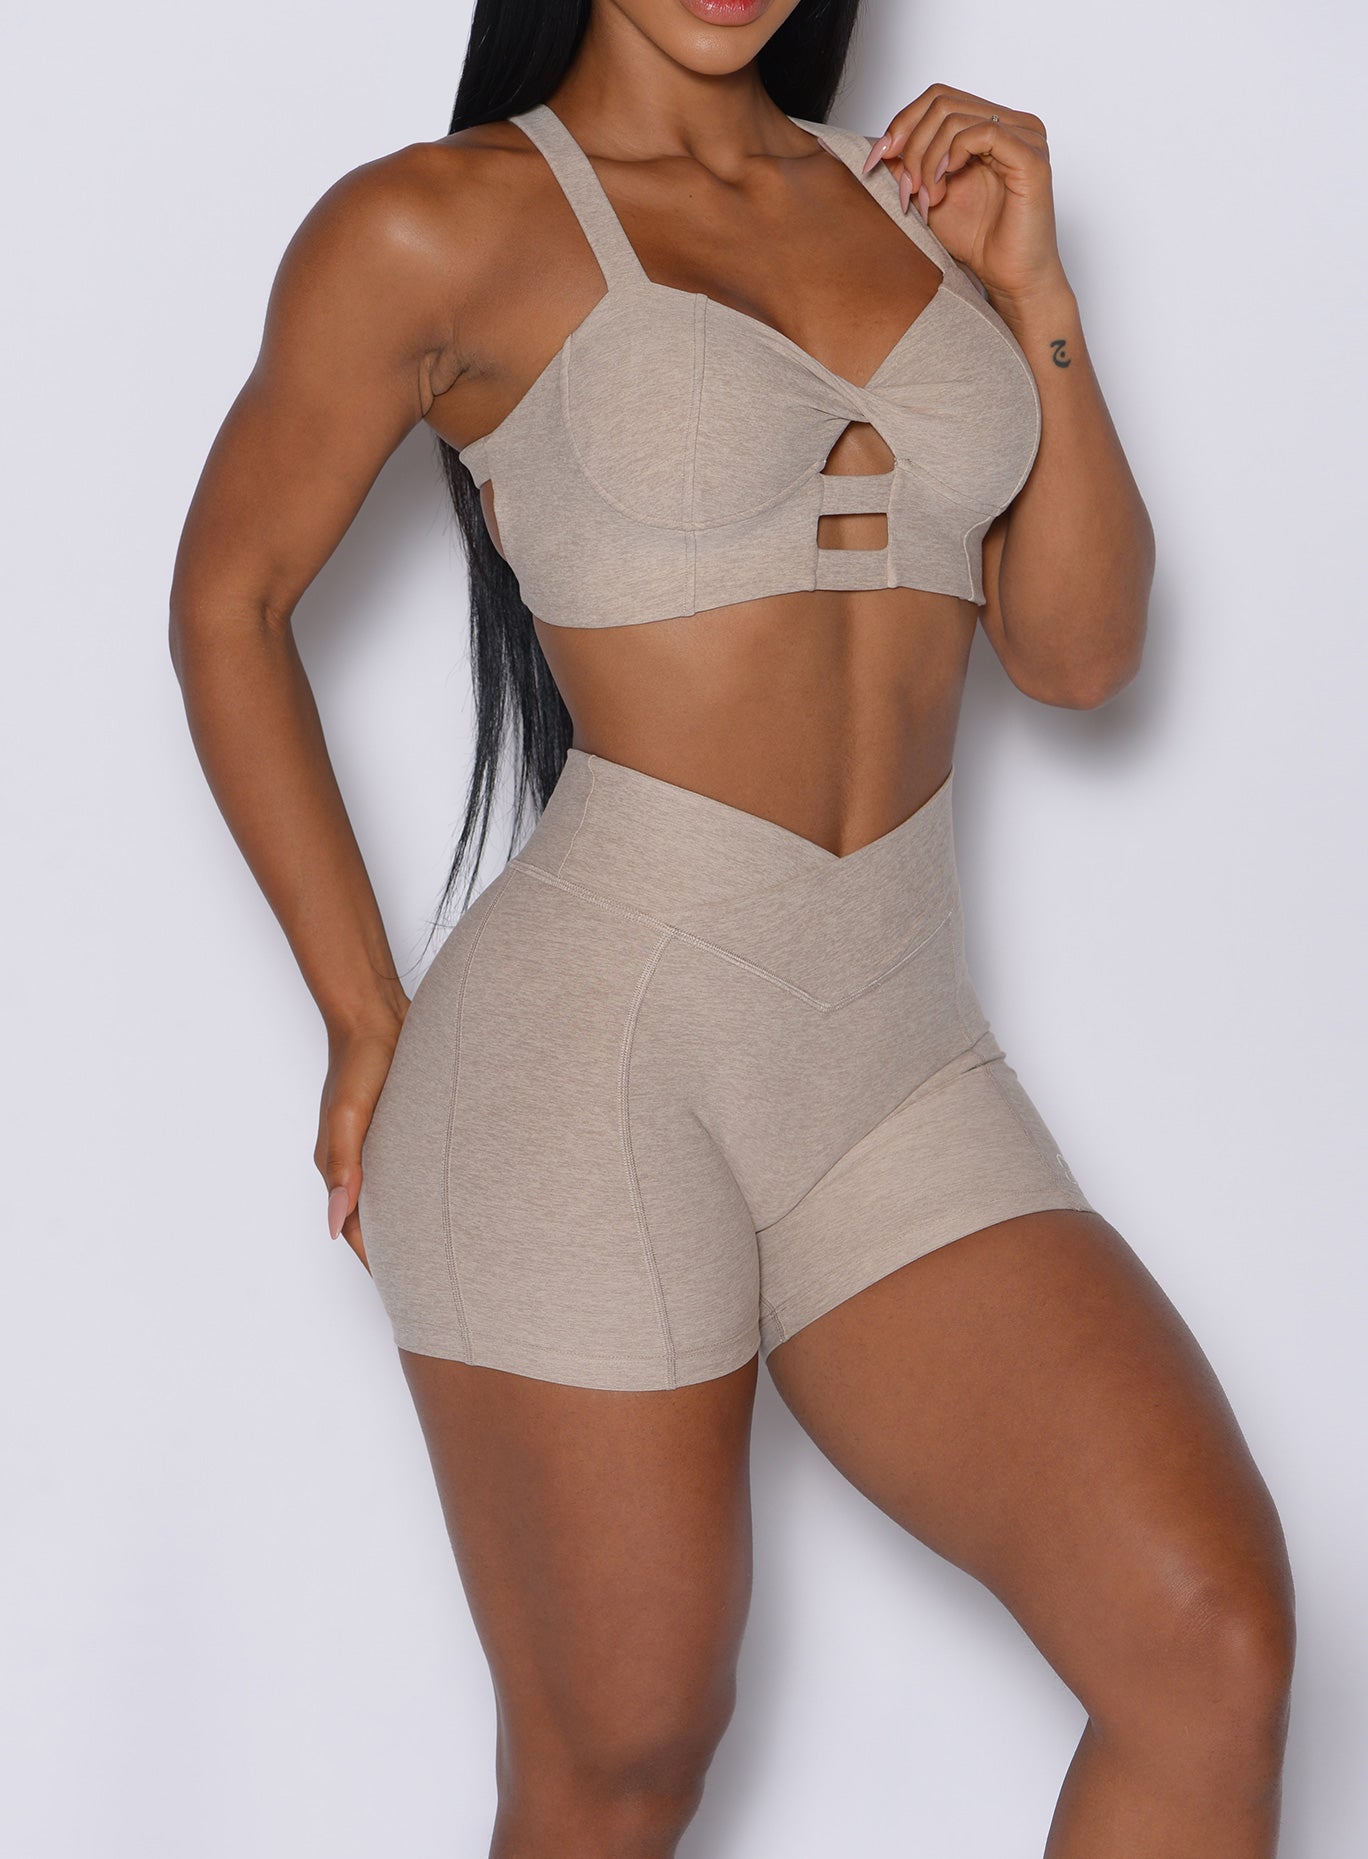 front profile picture of a model wearing our core set bra in taupe color along with the matching shorts